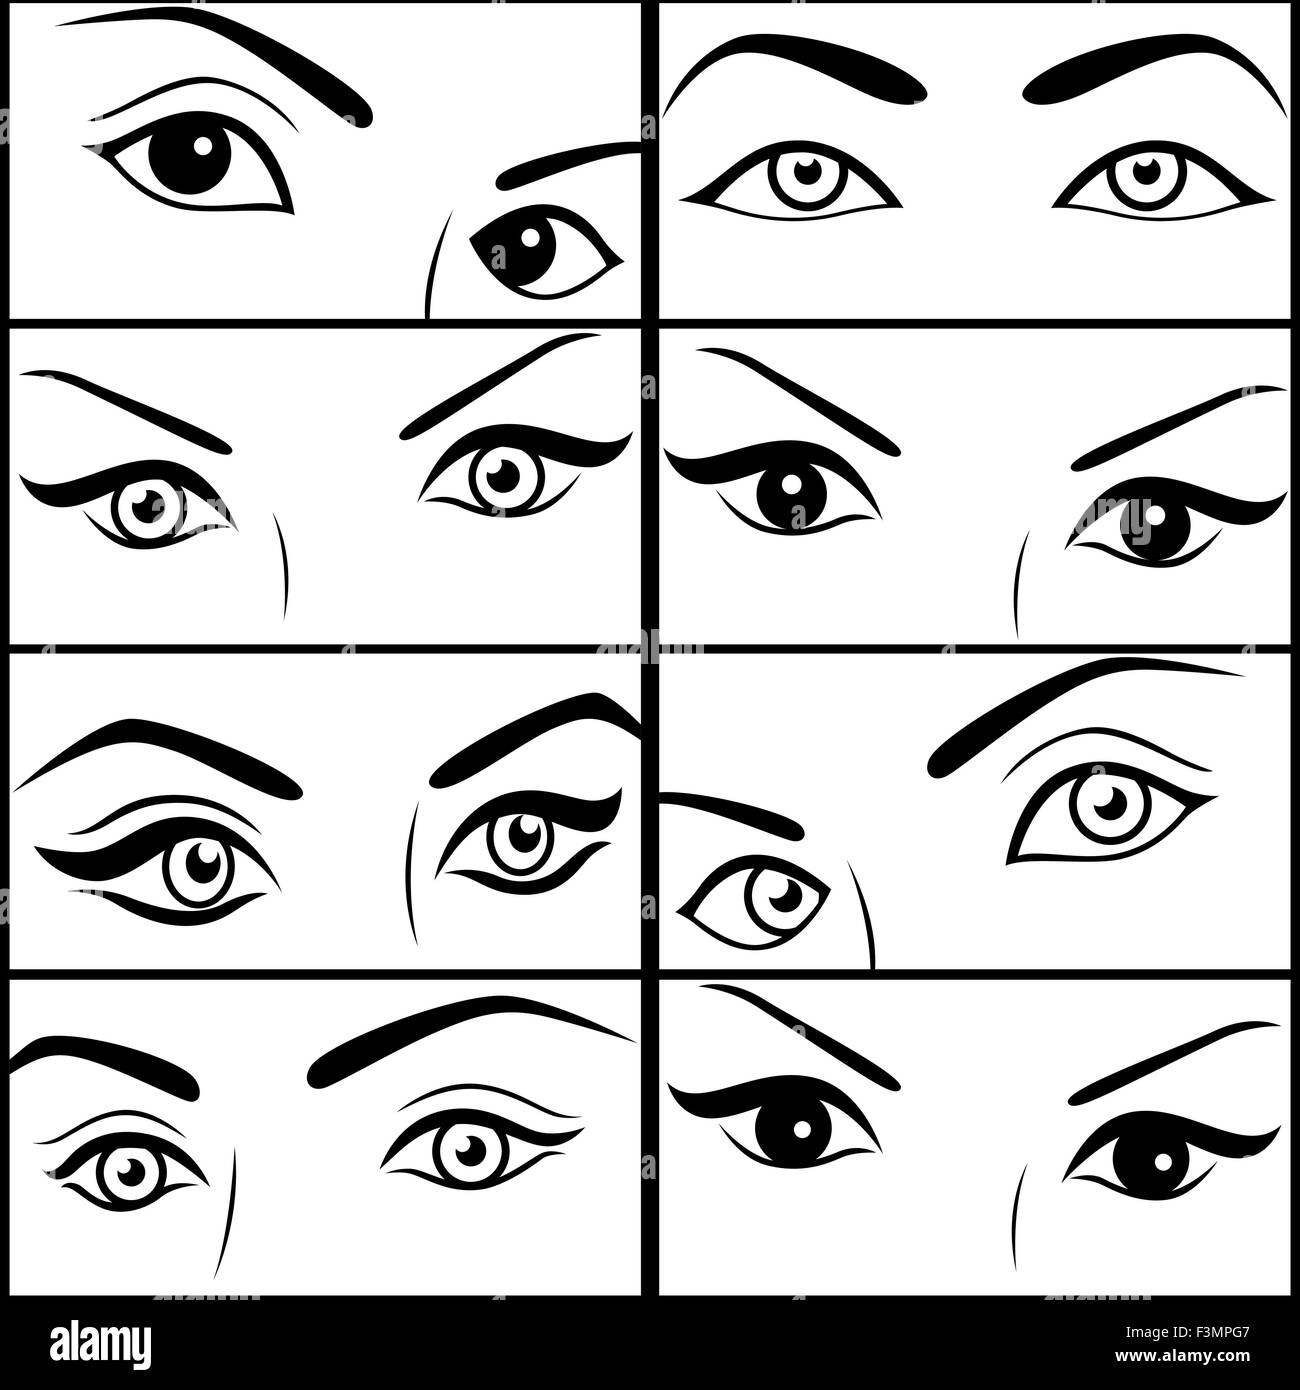 Premium Vector  A drawing of a pair of eyes with the words  the word eye   on the bottom right